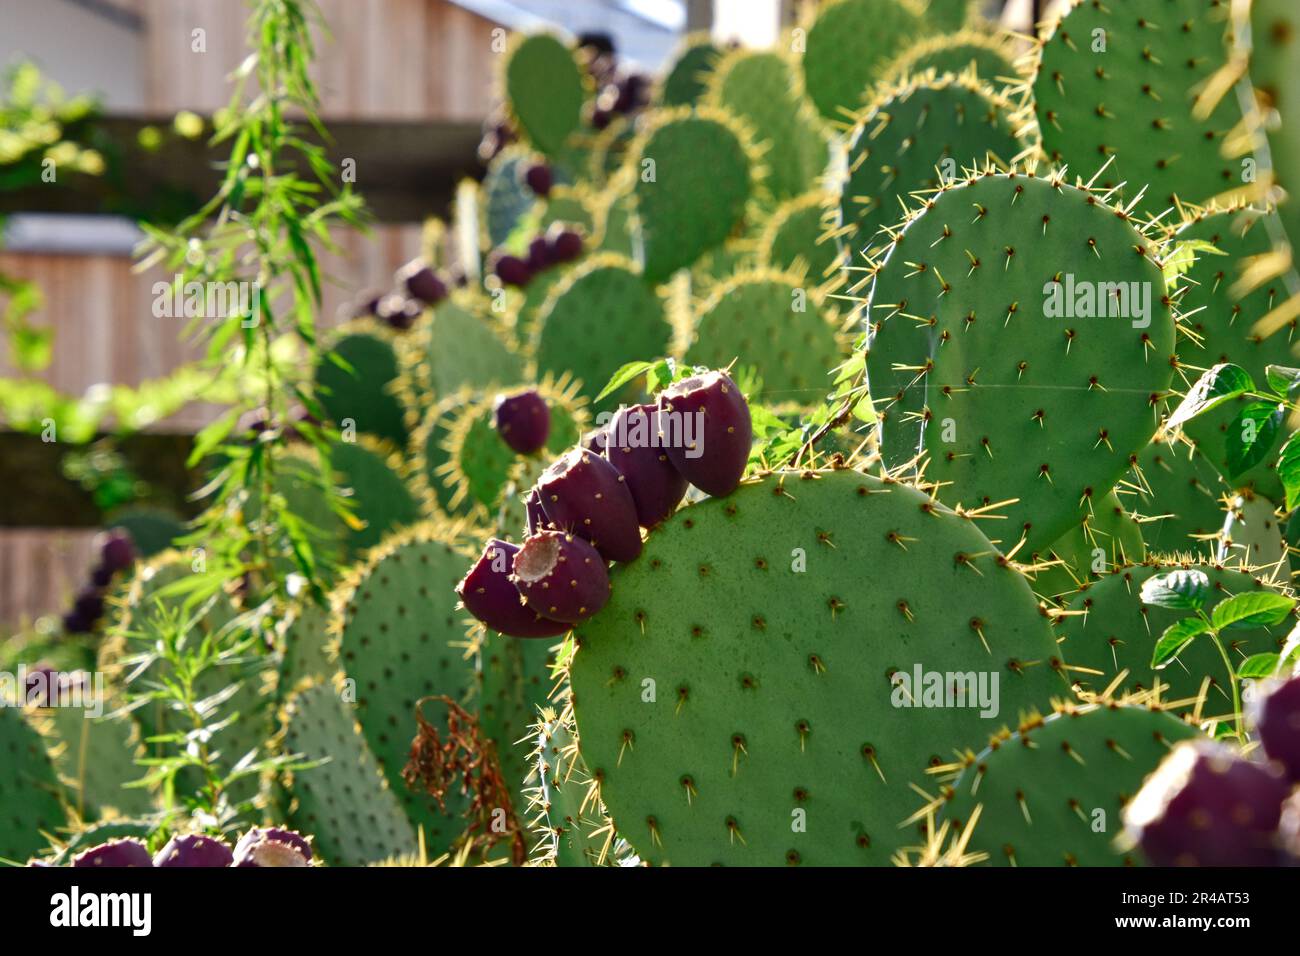 An image of a closeup of a cactus tree with purple-colored fruits covering its branches Stock Photo